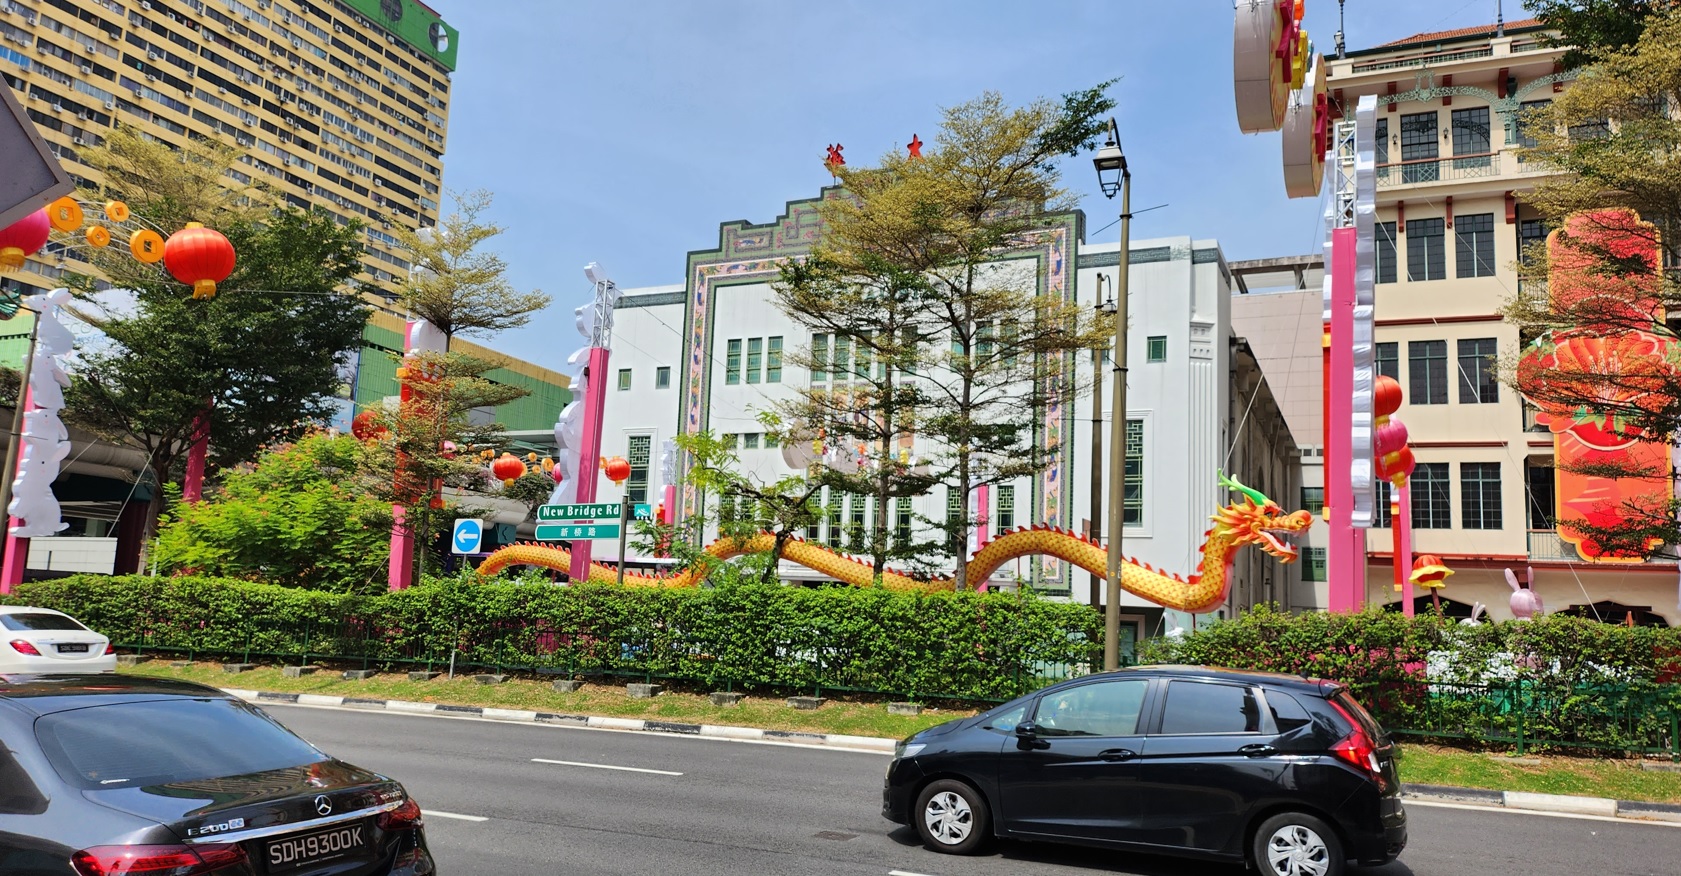 Street Decorations at Chinatown